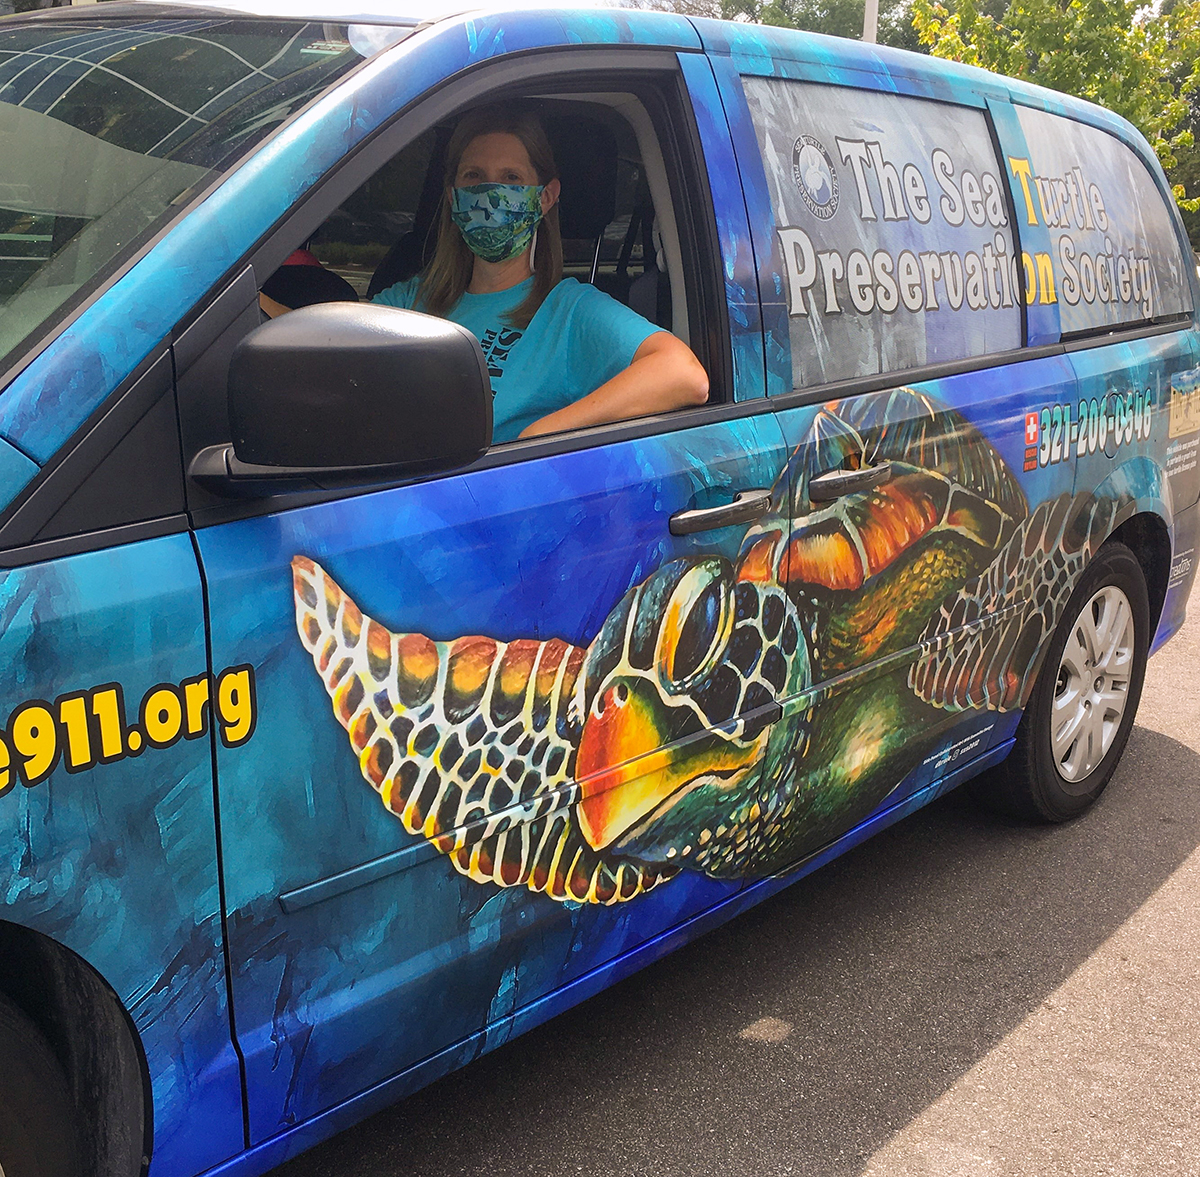  Susan Skinner, preservation society chairwoman, pitches in to drive the rescue van when an injured or stranded turtle needs help.